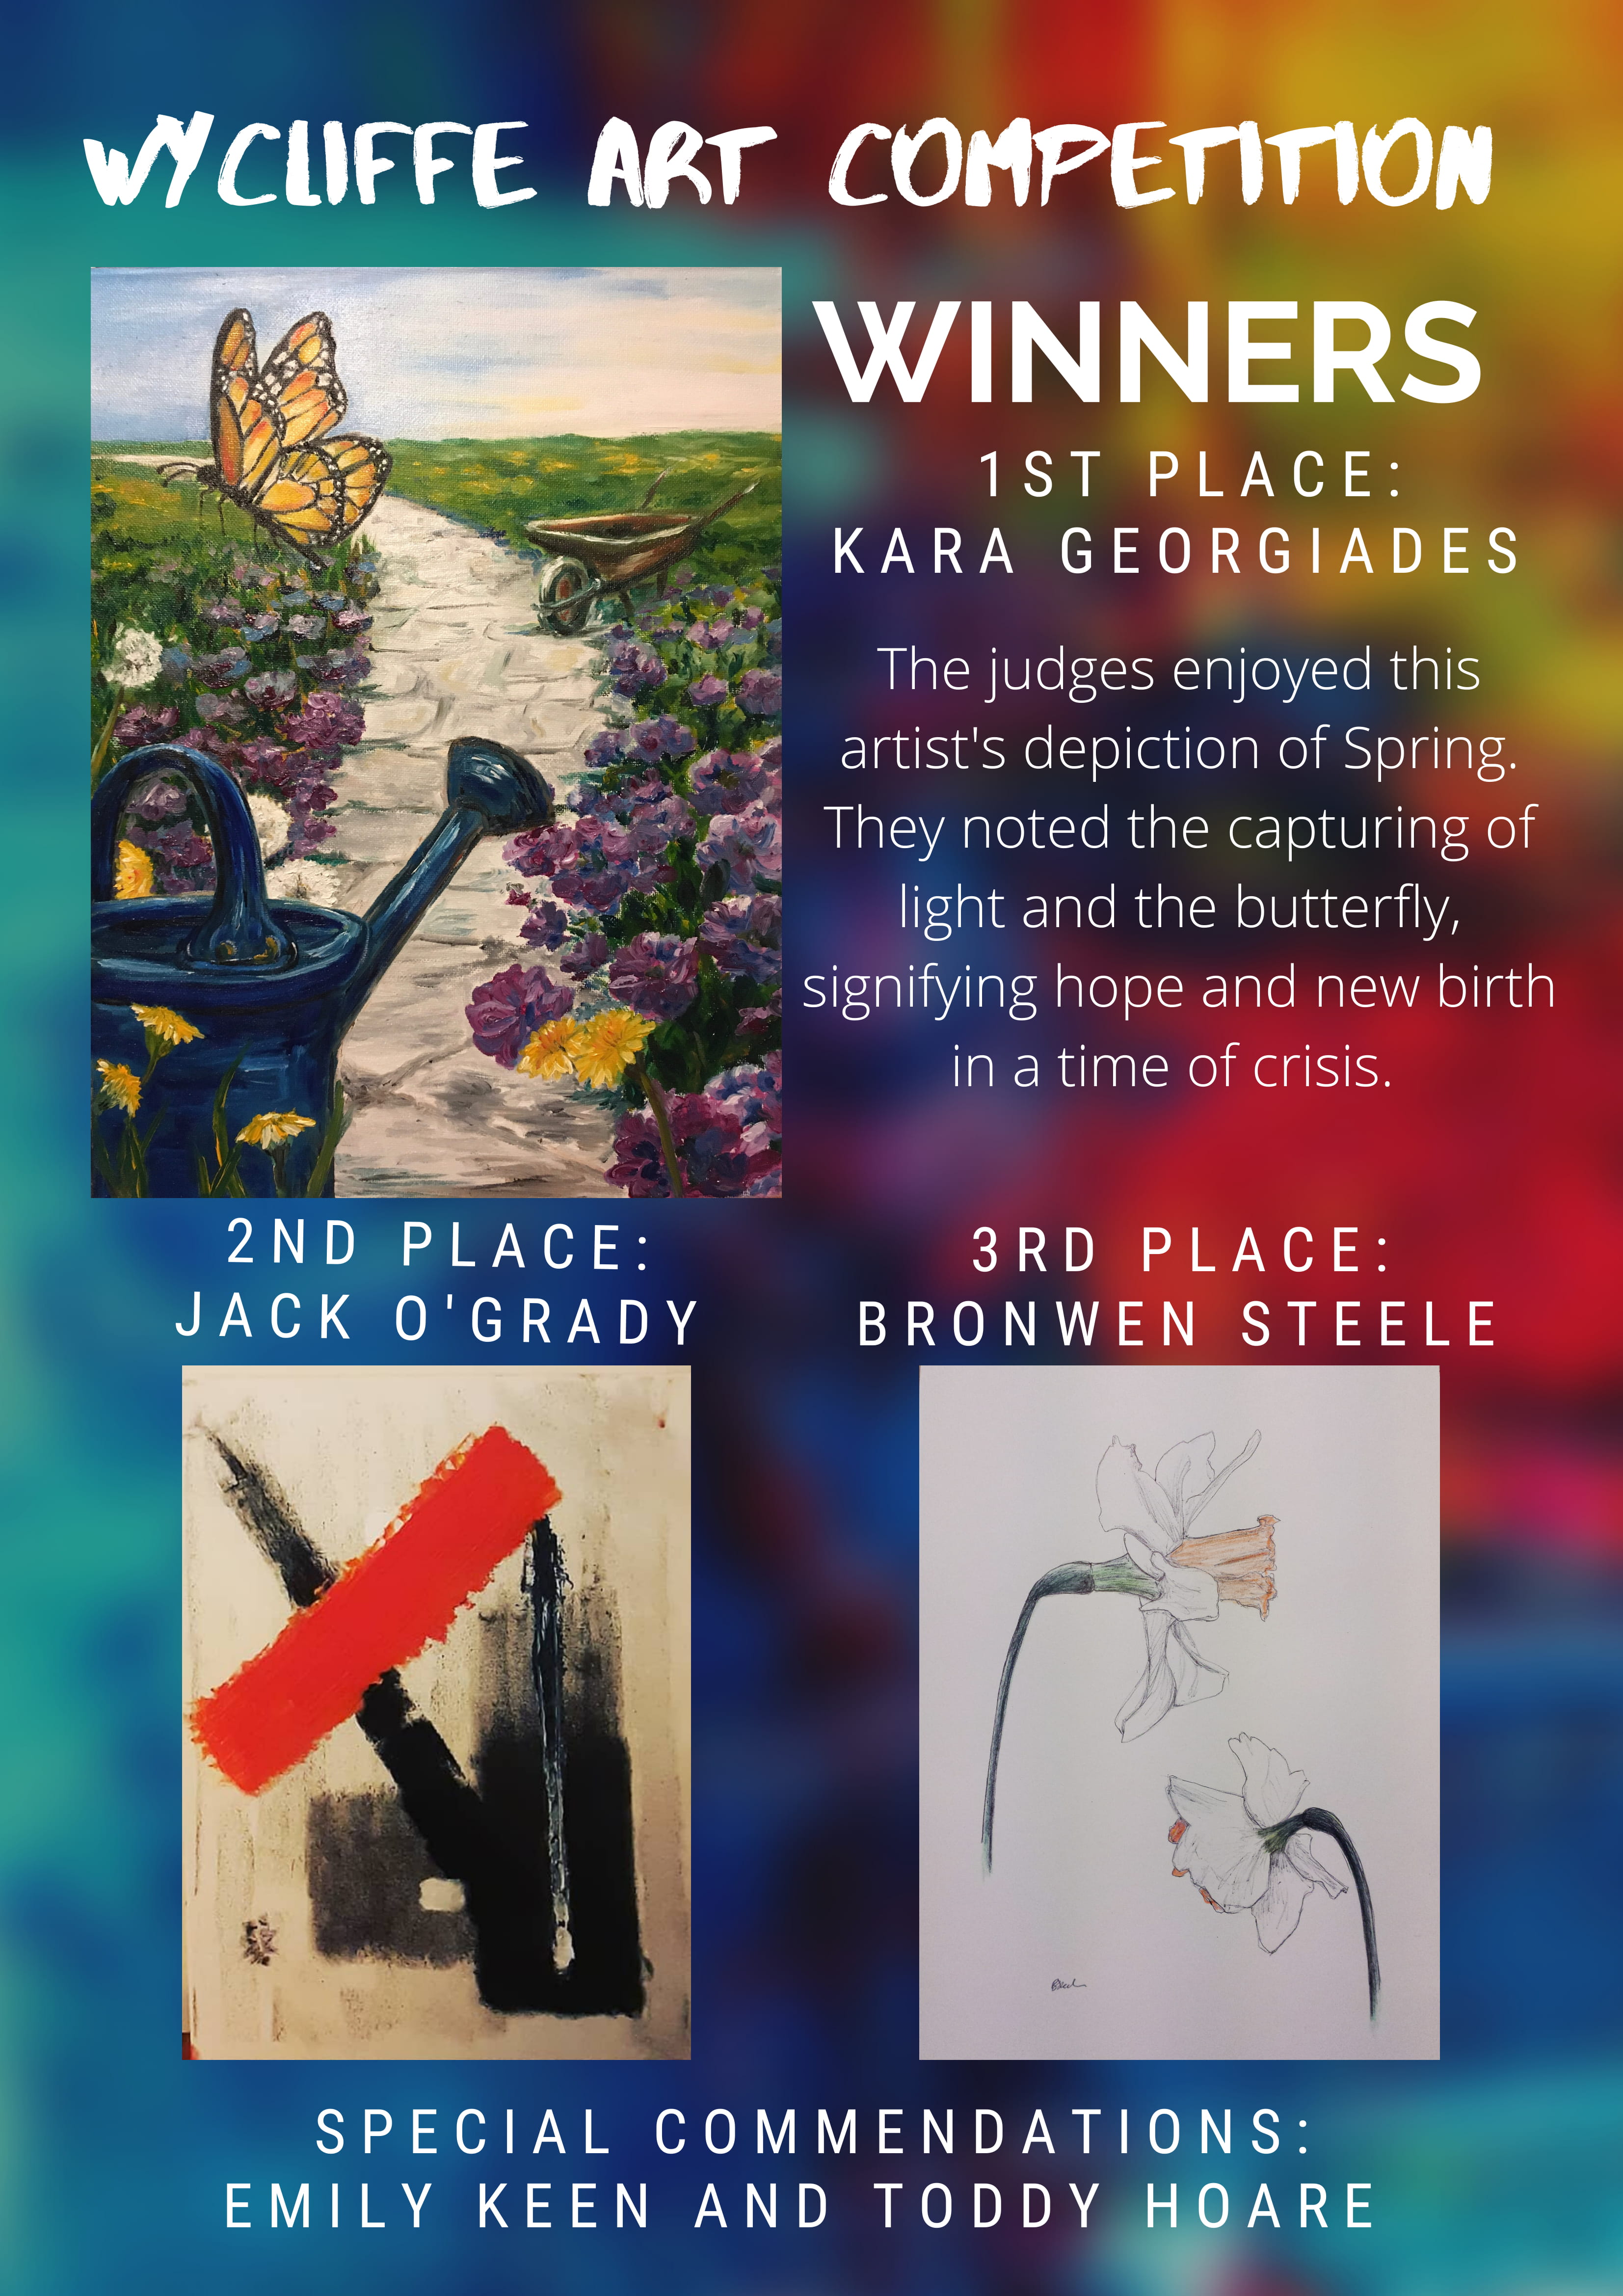 wycliffe art competition march 2020 winners poster